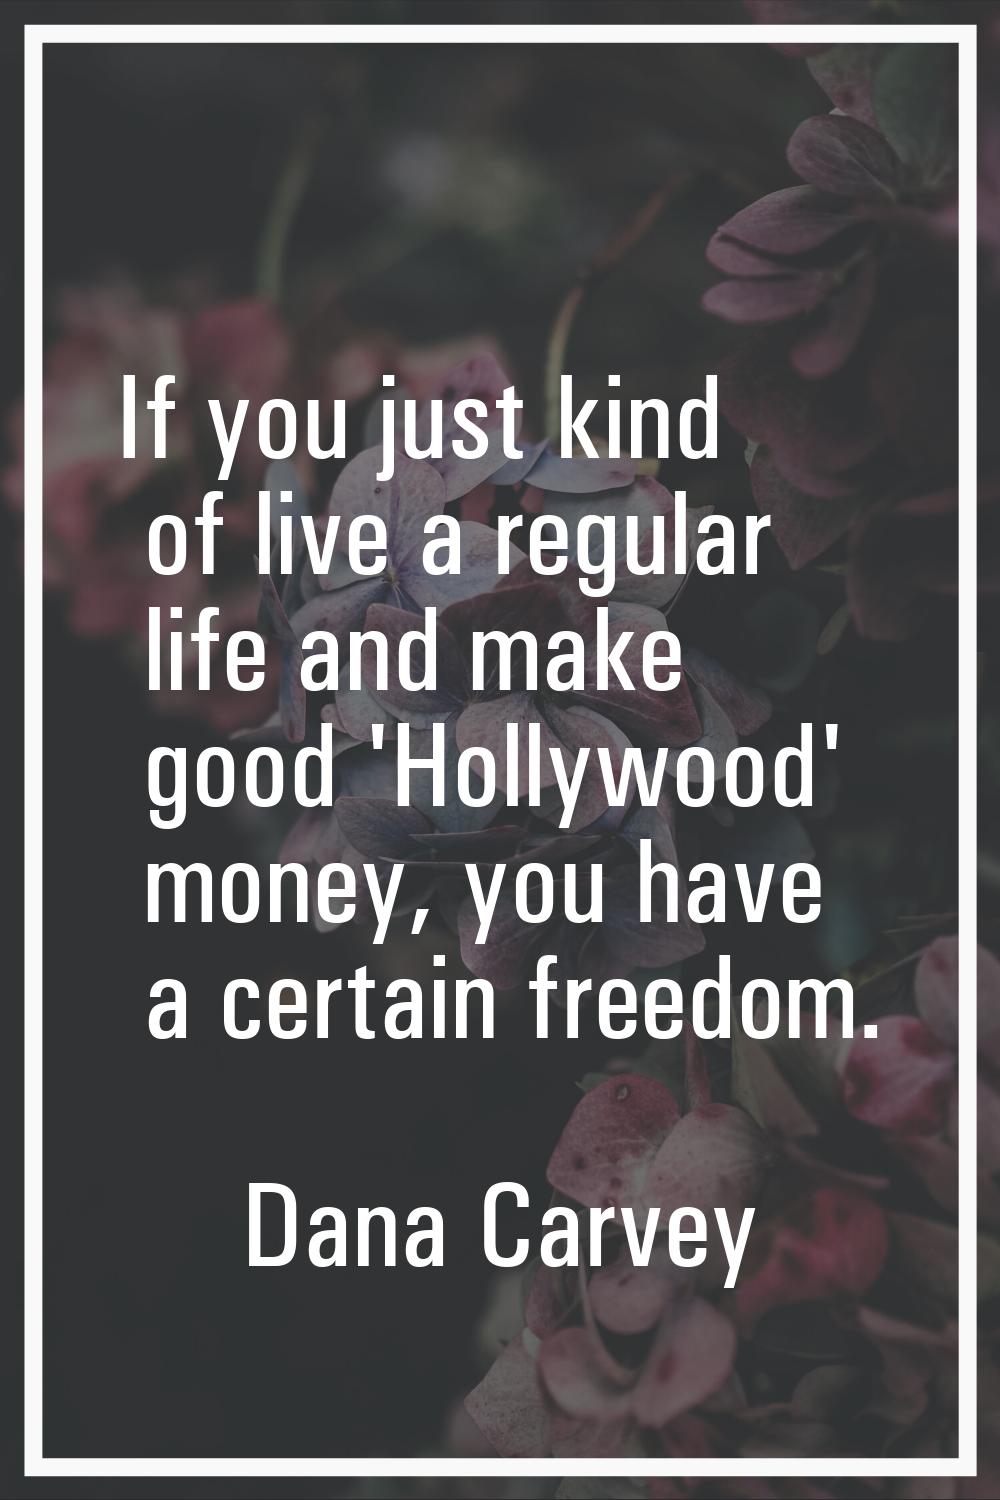 If you just kind of live a regular life and make good 'Hollywood' money, you have a certain freedom